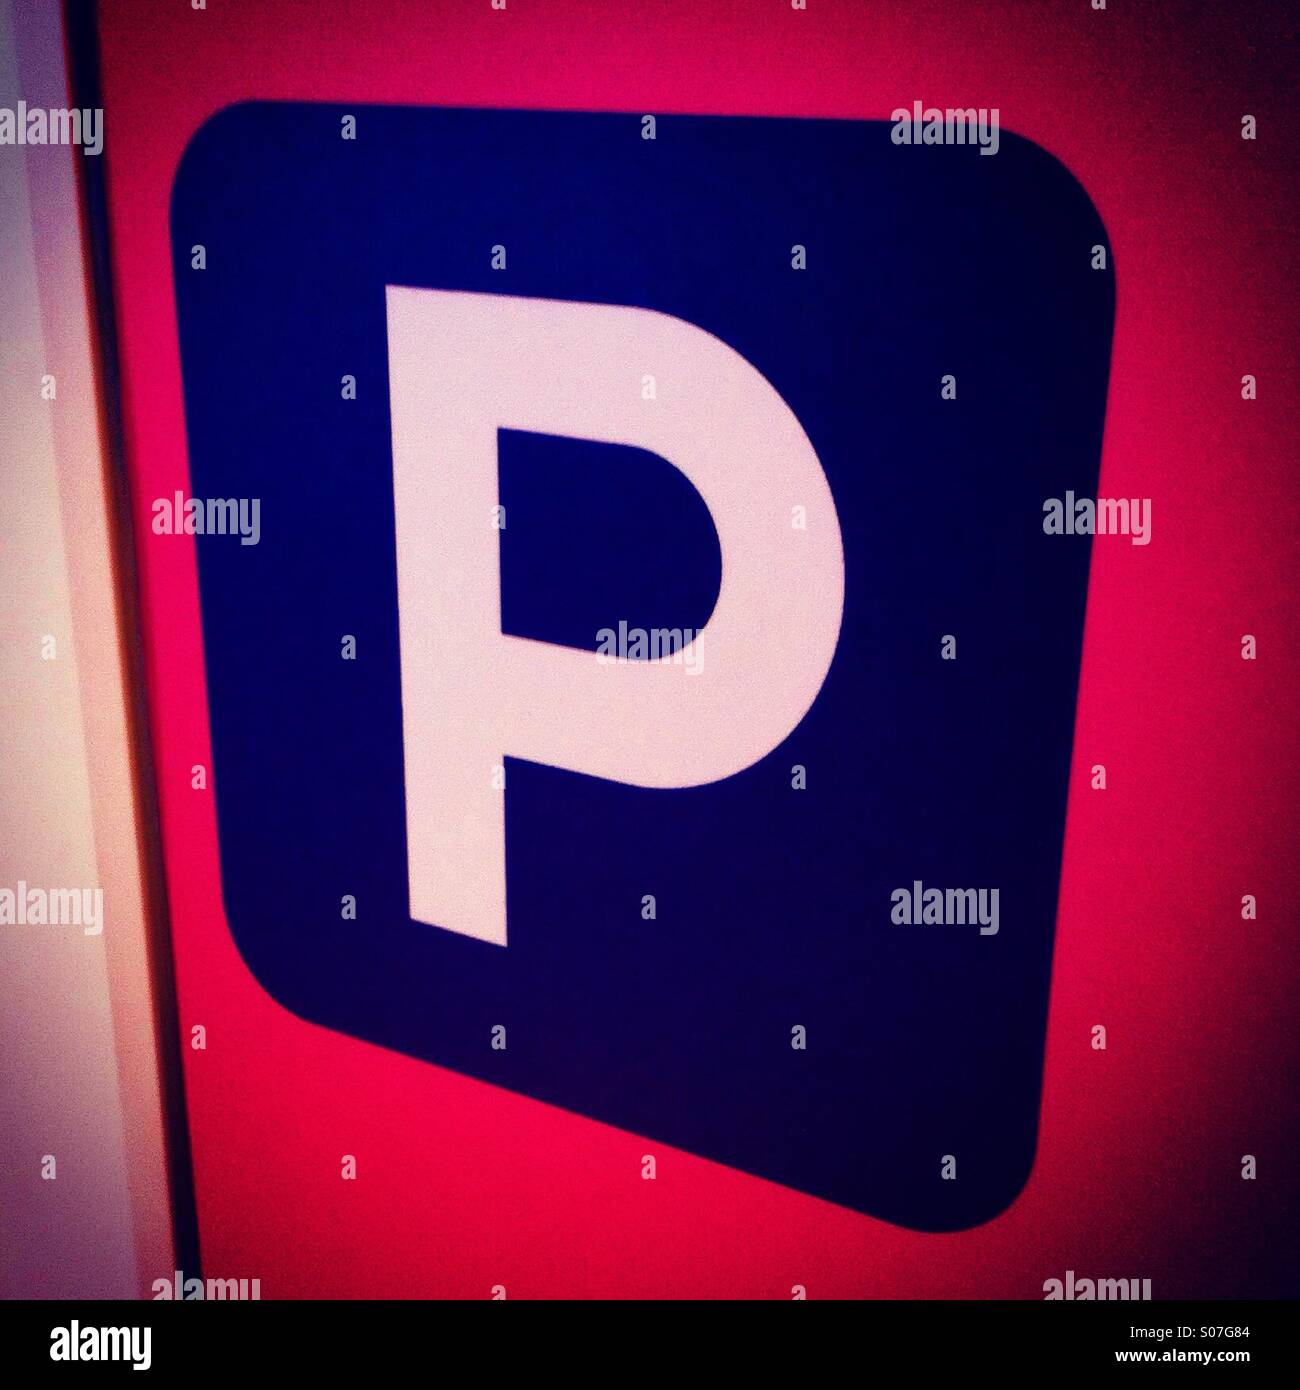 Parking logo done with the letter P in white color on blue square Stock Photo